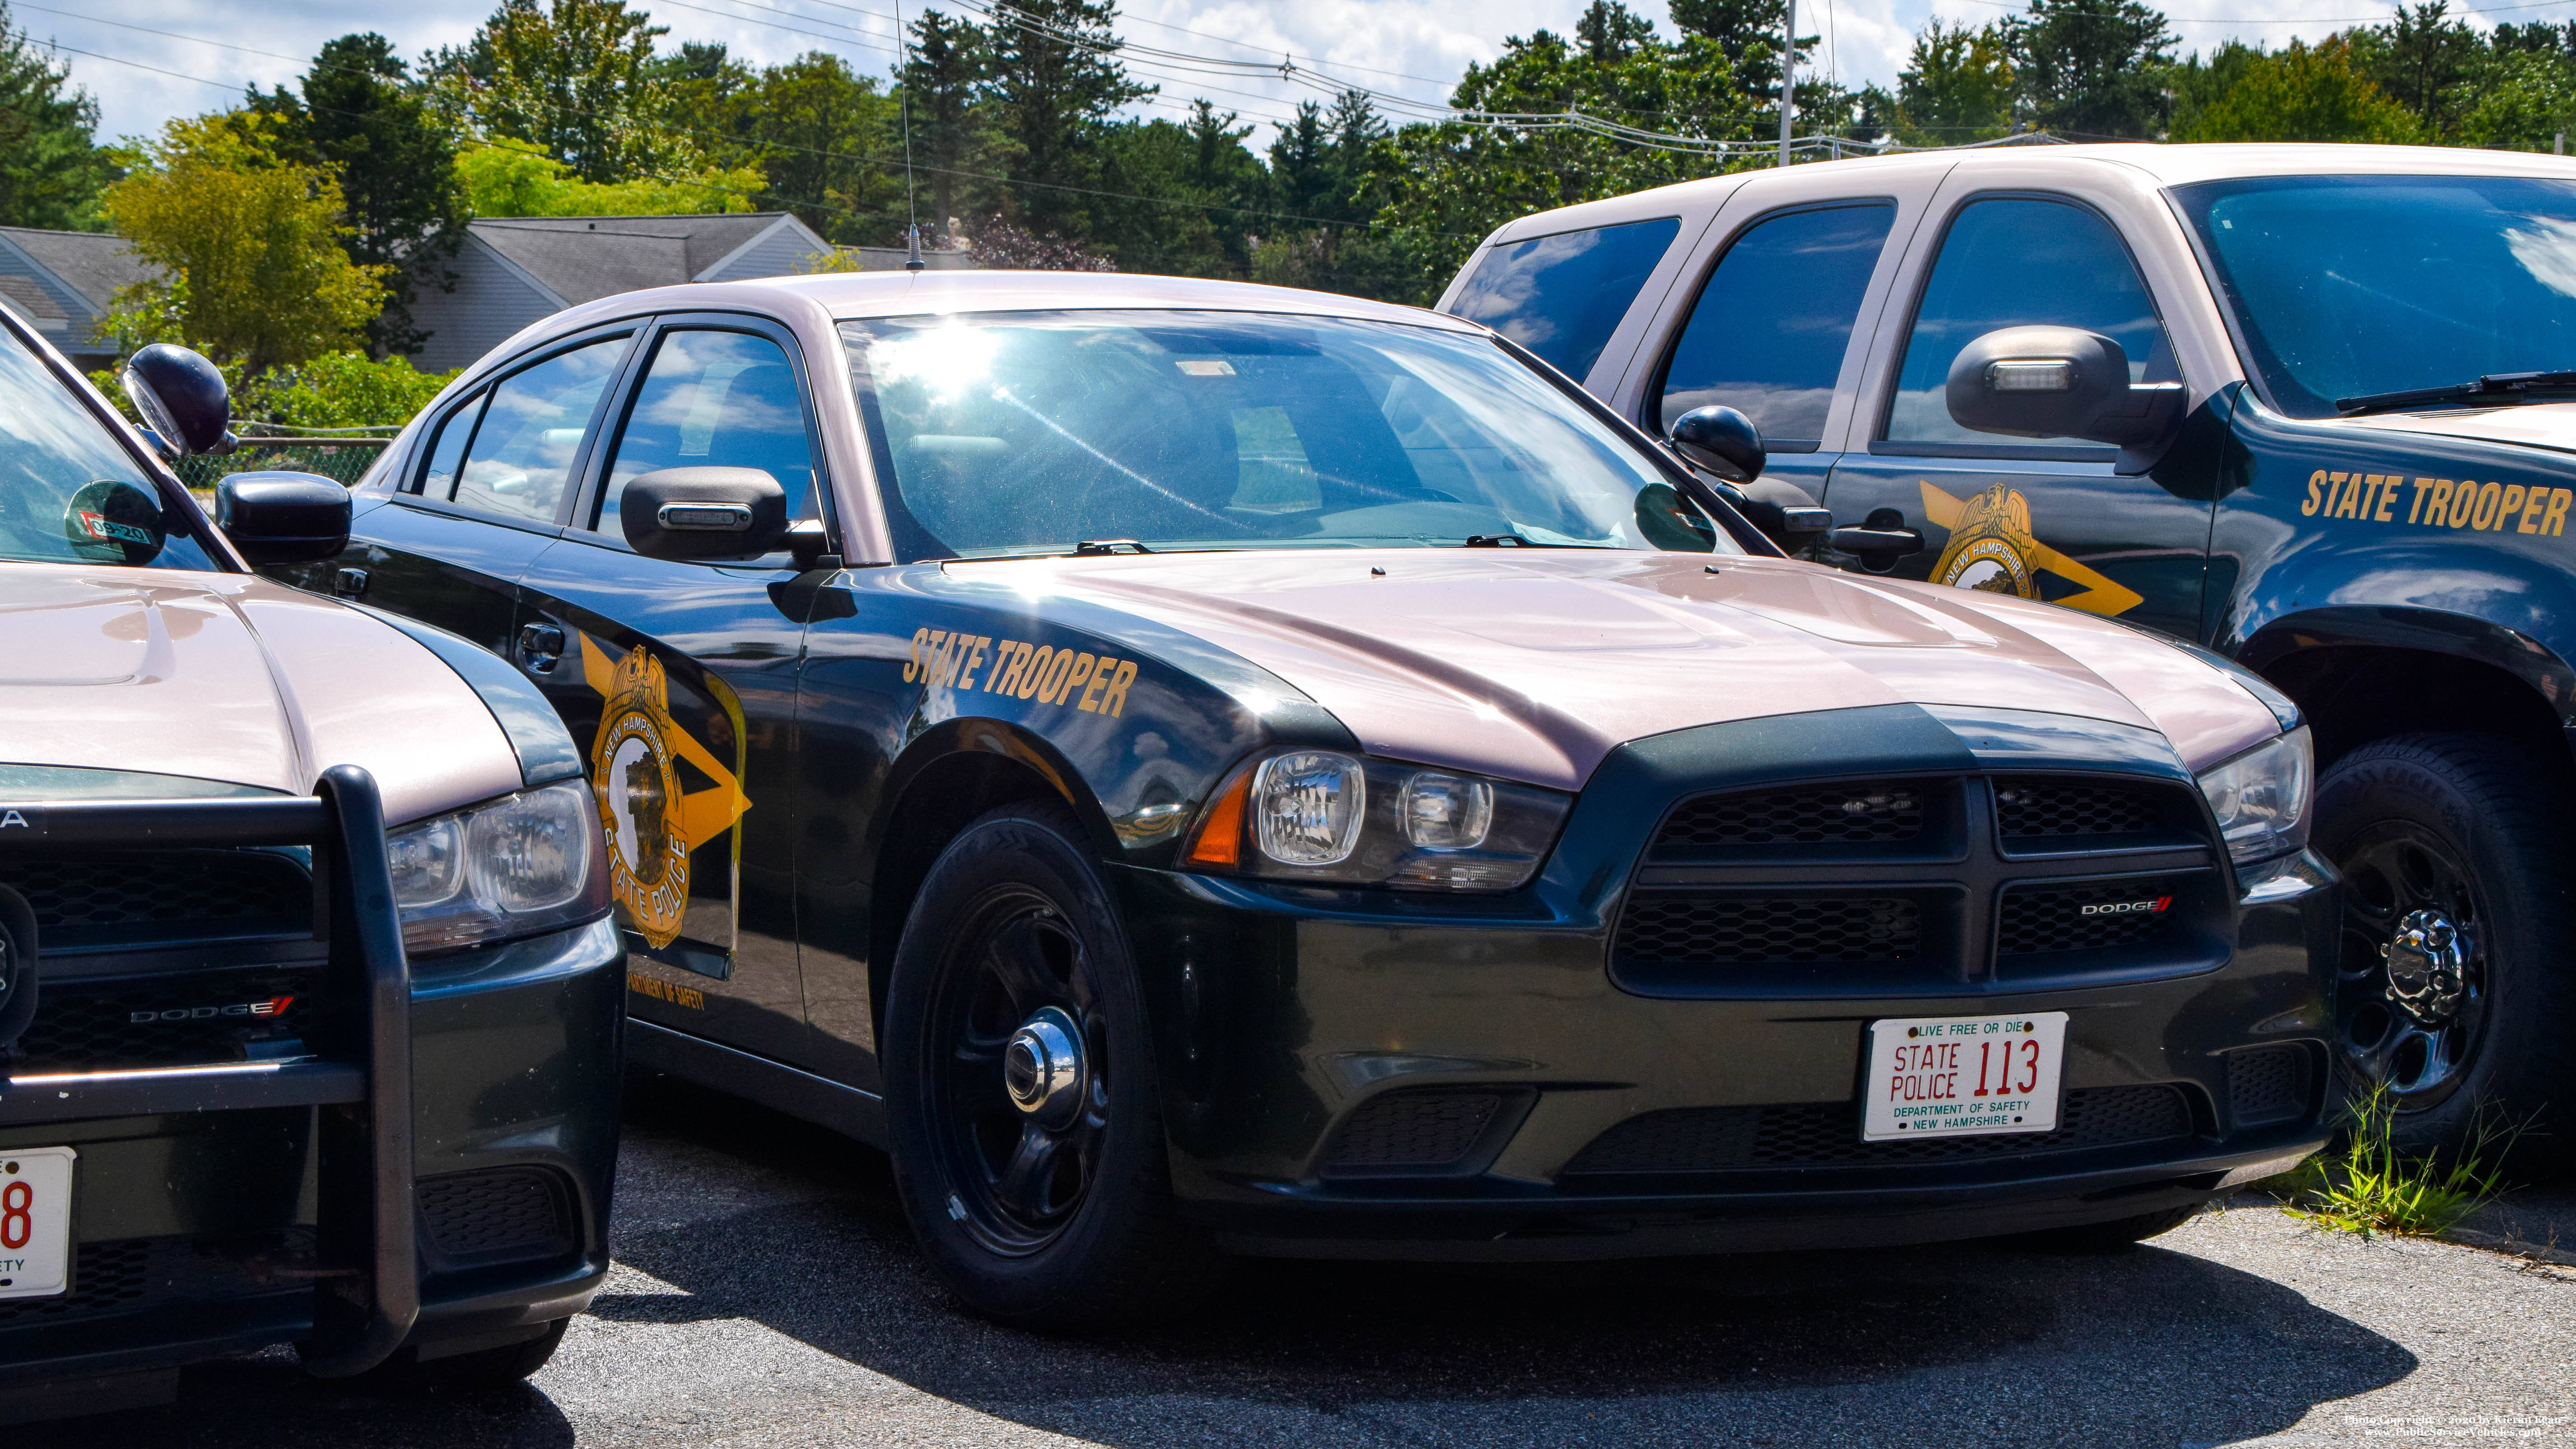 A photo  of New Hampshire State Police
            Cruiser 113, a 2011-2014 Dodge Charger             taken by Kieran Egan